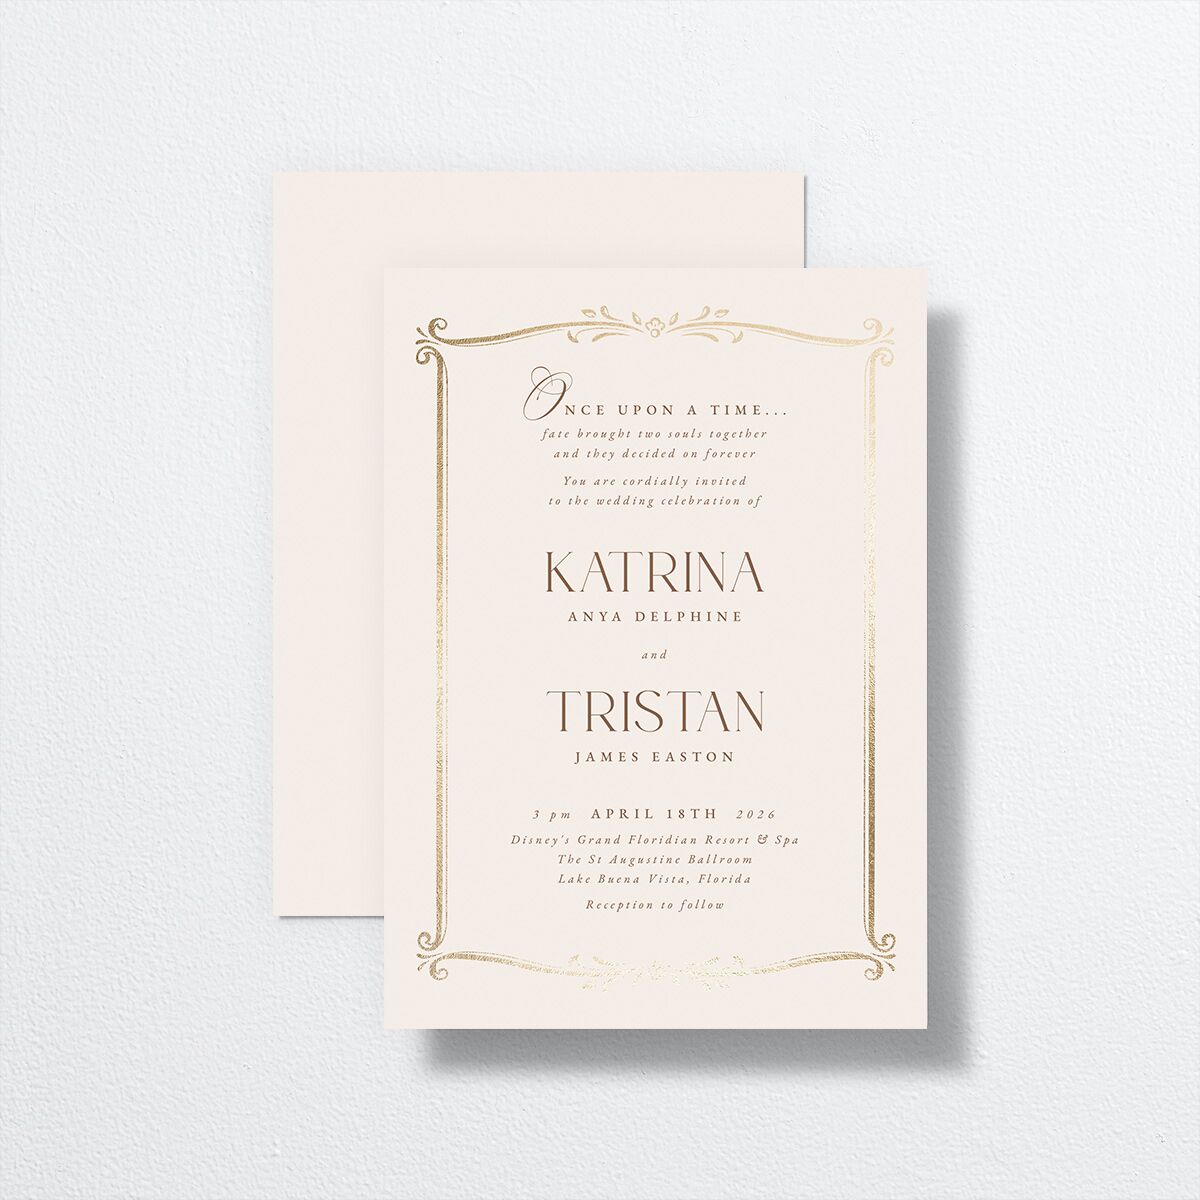 Fairytale Frame Wedding Invitations front-and-back